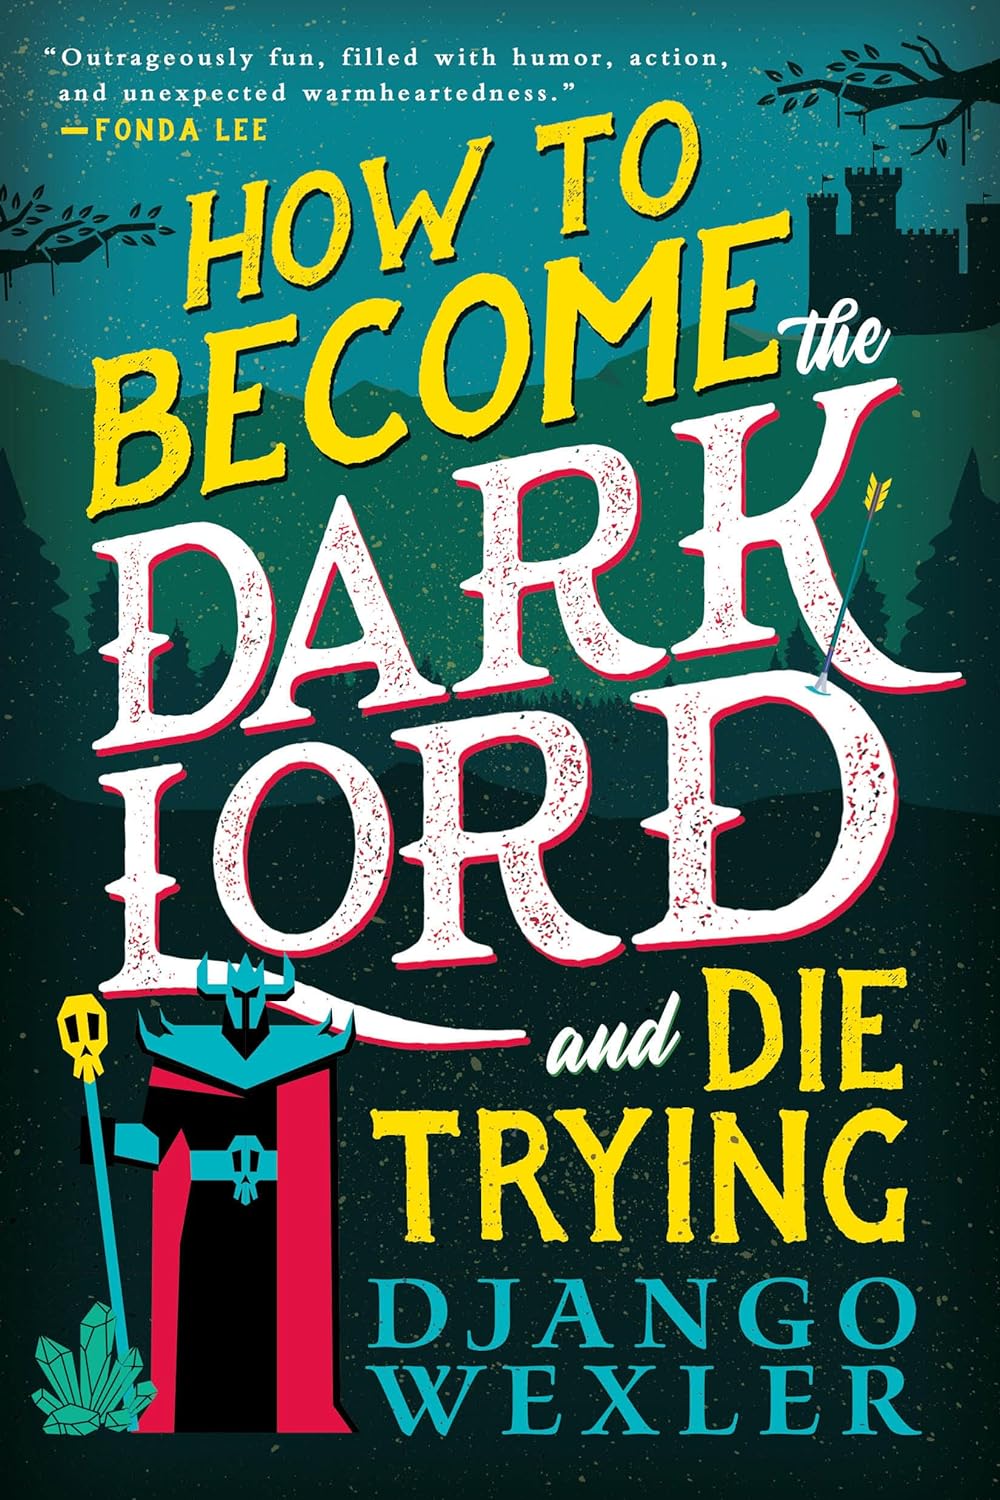 How to Become the Dark Lord and Die Trying - NJ Corrections Book Store